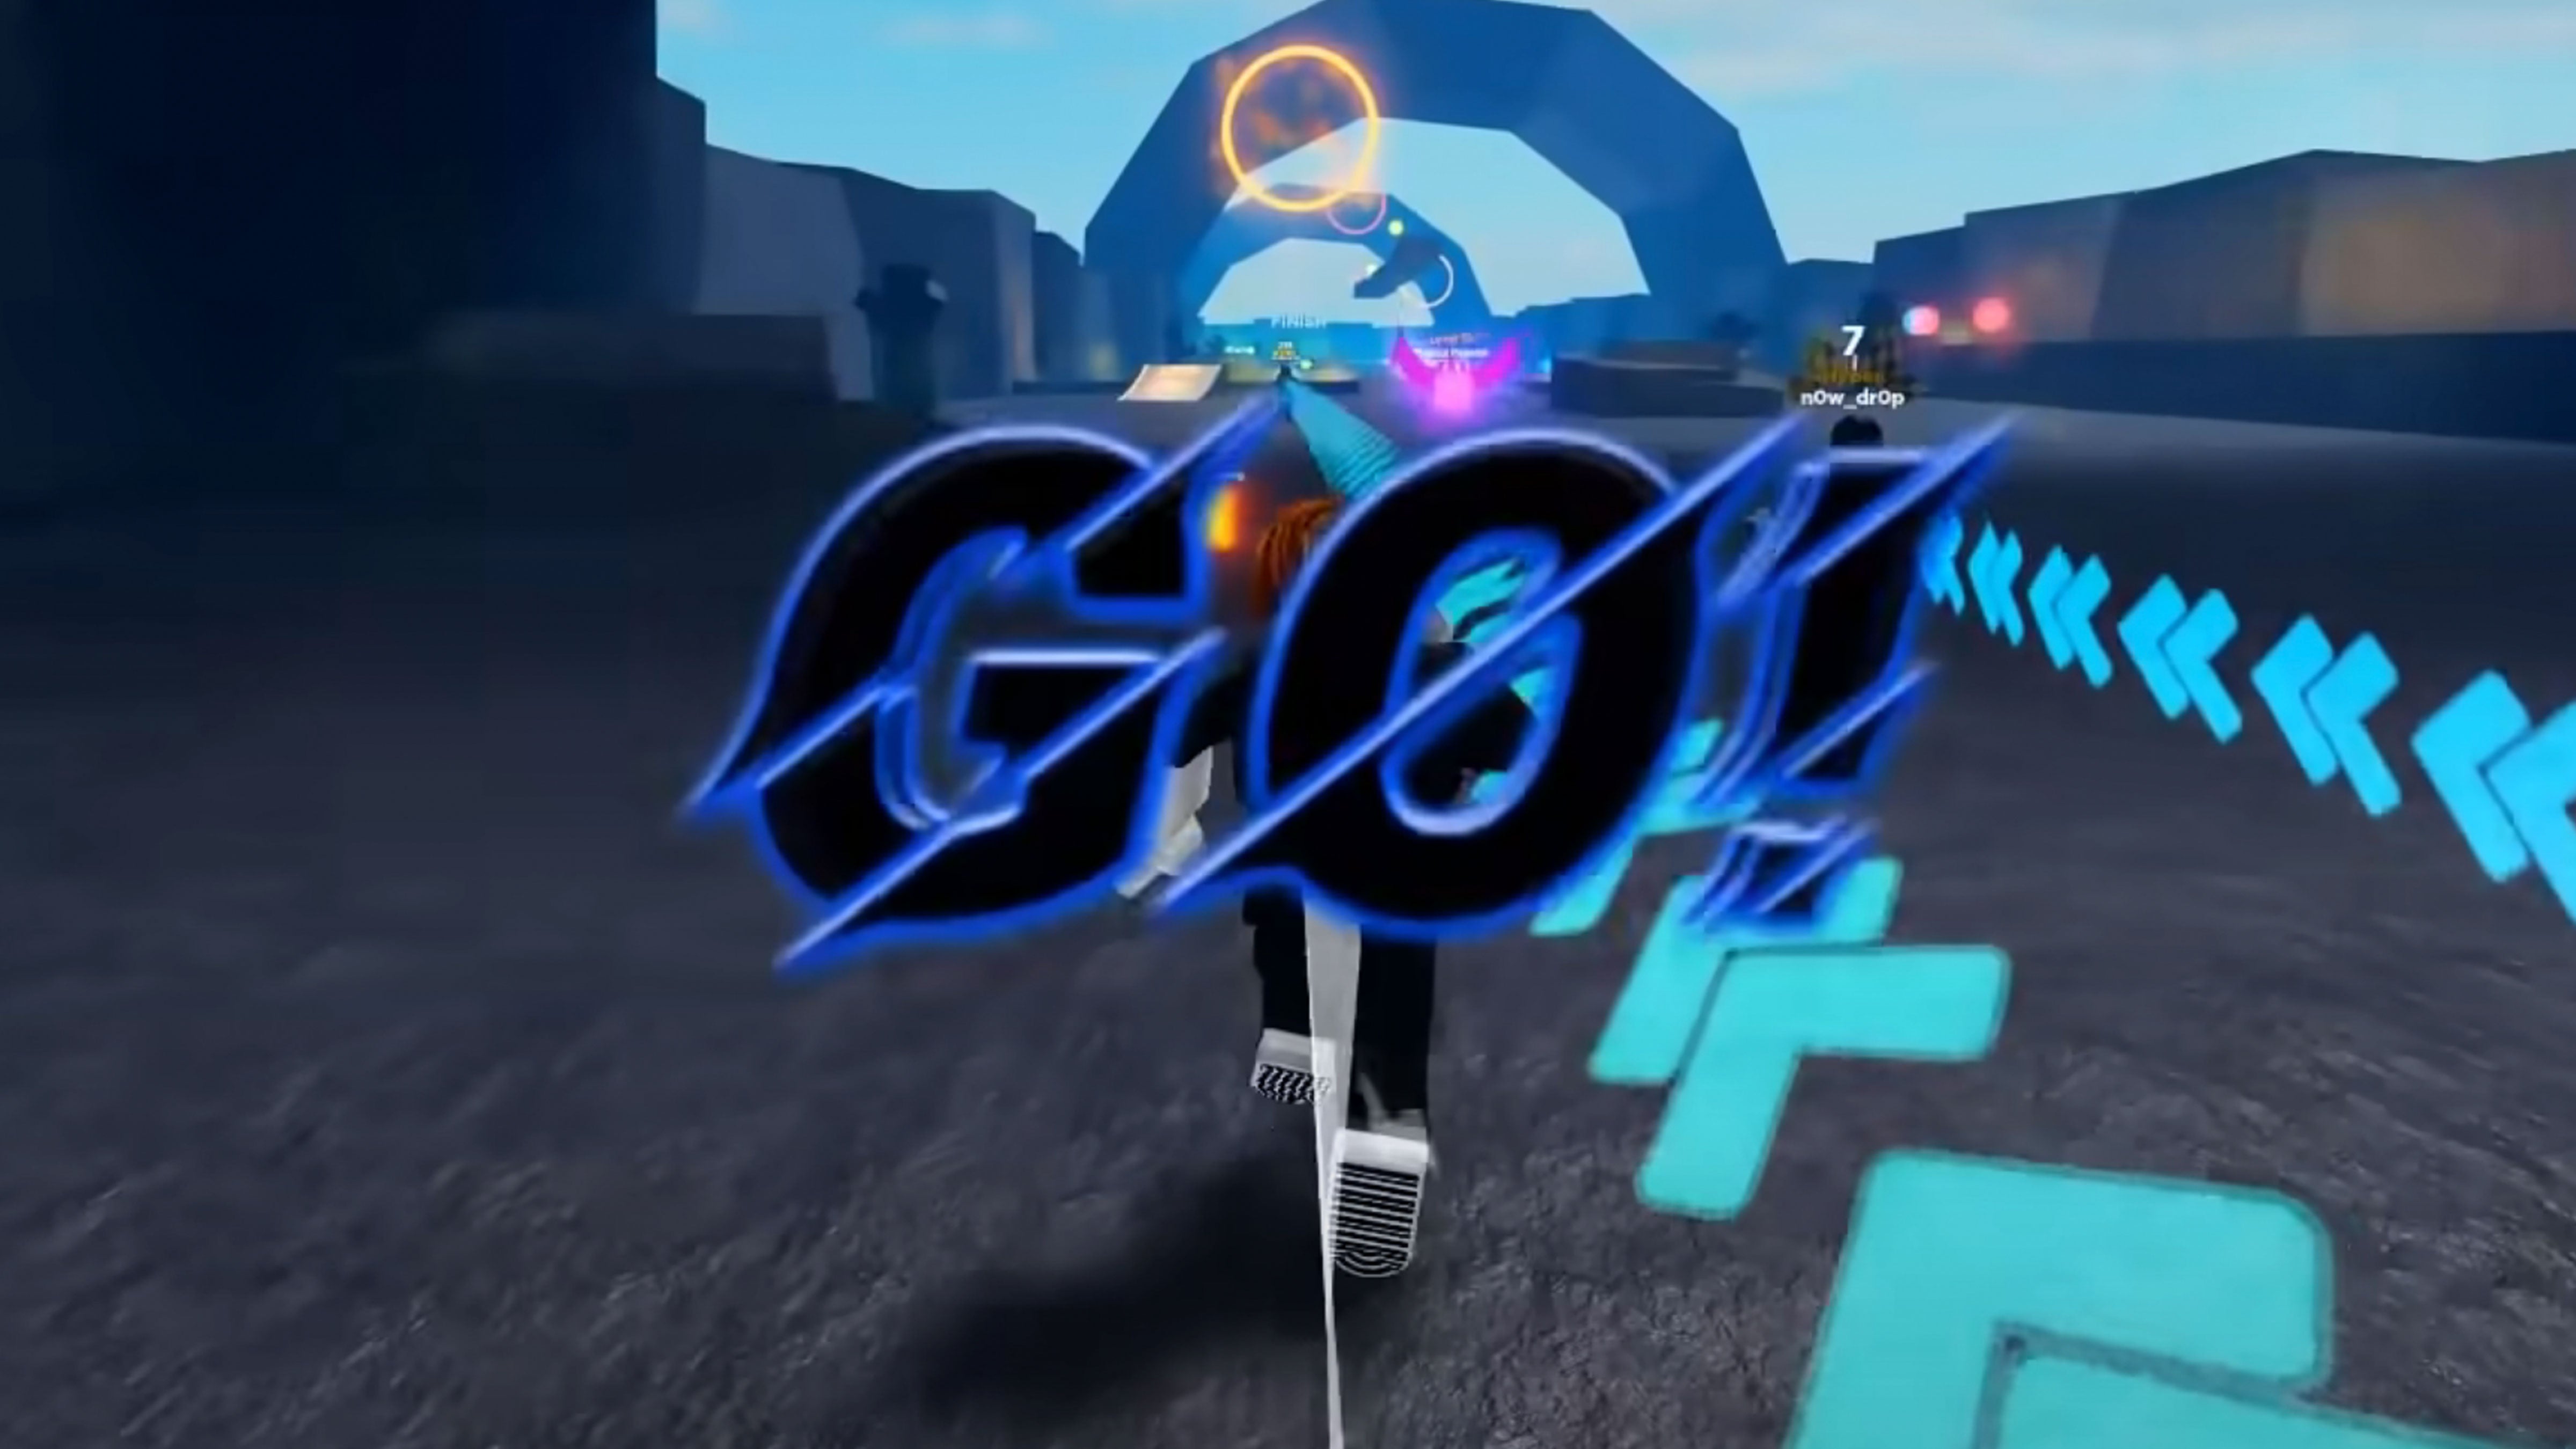 In-game screenshot of Roblox game Legends of Speed showing a player at the start line with 'GO!' flashing up on screen.